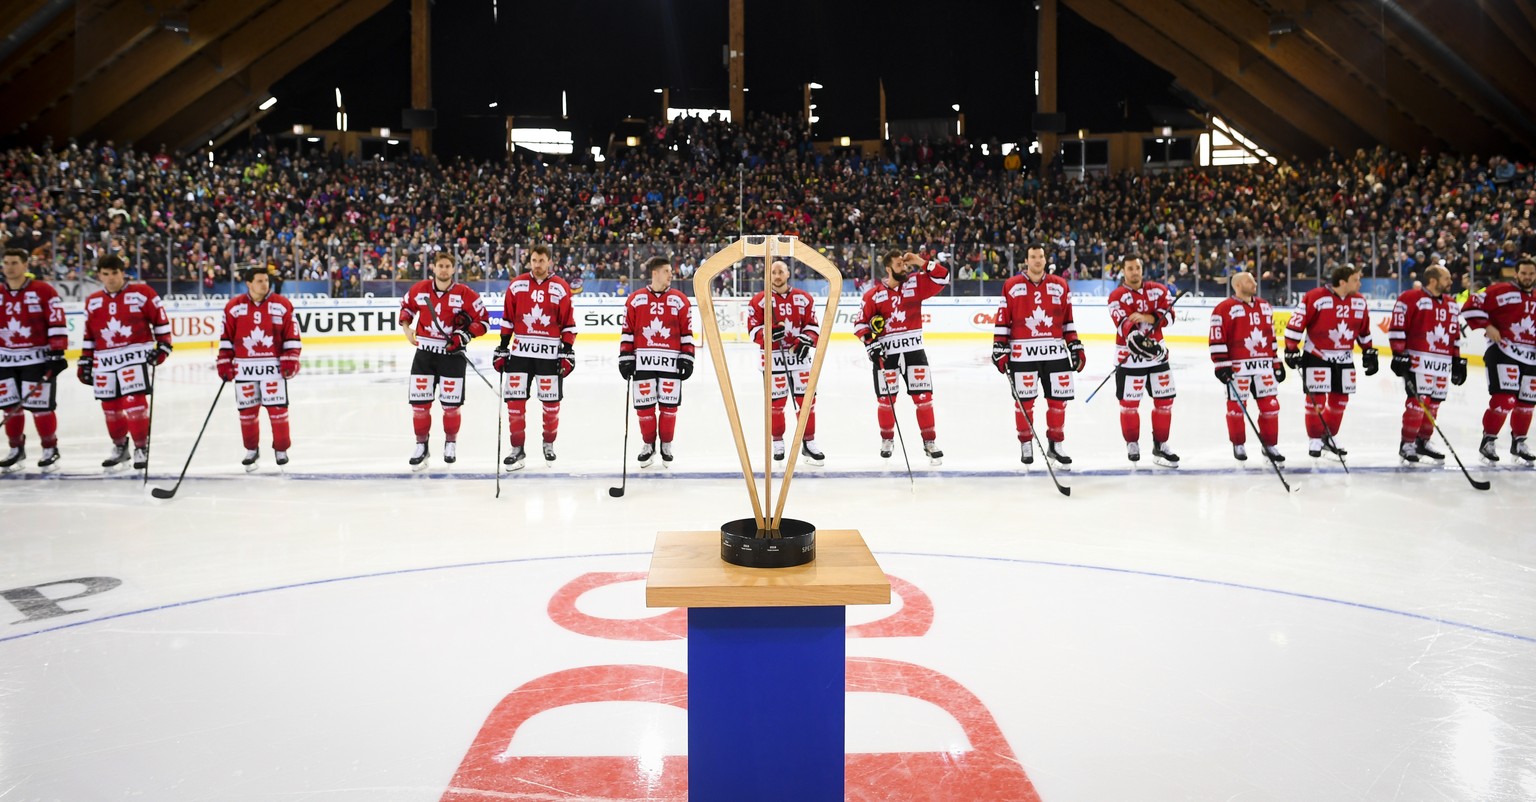 Team Canada lines up in front of the trophy prior the final game between Team Canada and KalPa Kuopio Hockey Oy at the 92th Spengler Cup ice hockey tournament in Davos, Switzerland, Monday, December 3 ...